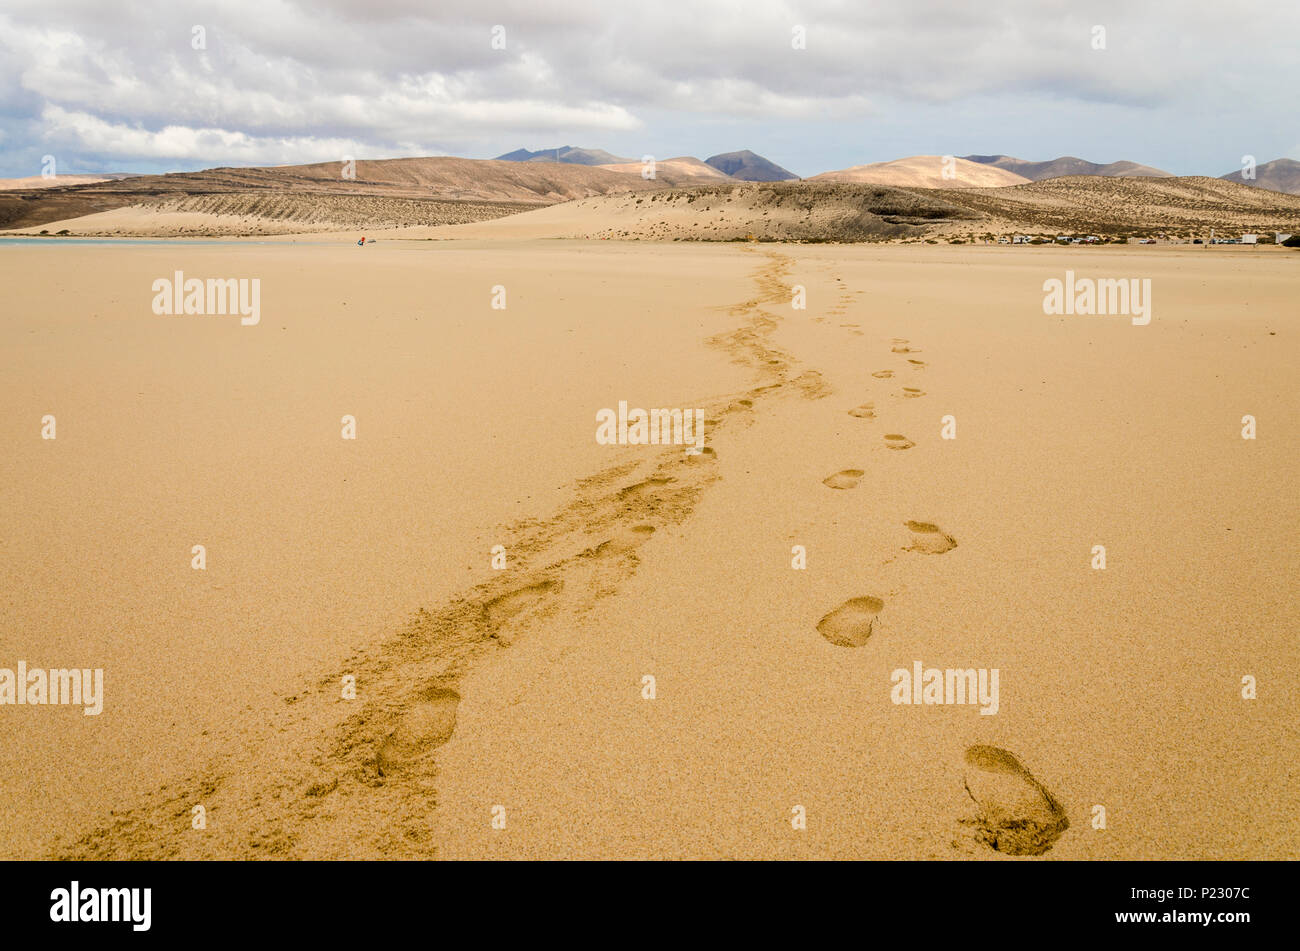 Footprints on the sandy beach of Sotavento, Fuerteventura, Canary Islands with a mountain range and stormy sky Stock Photo